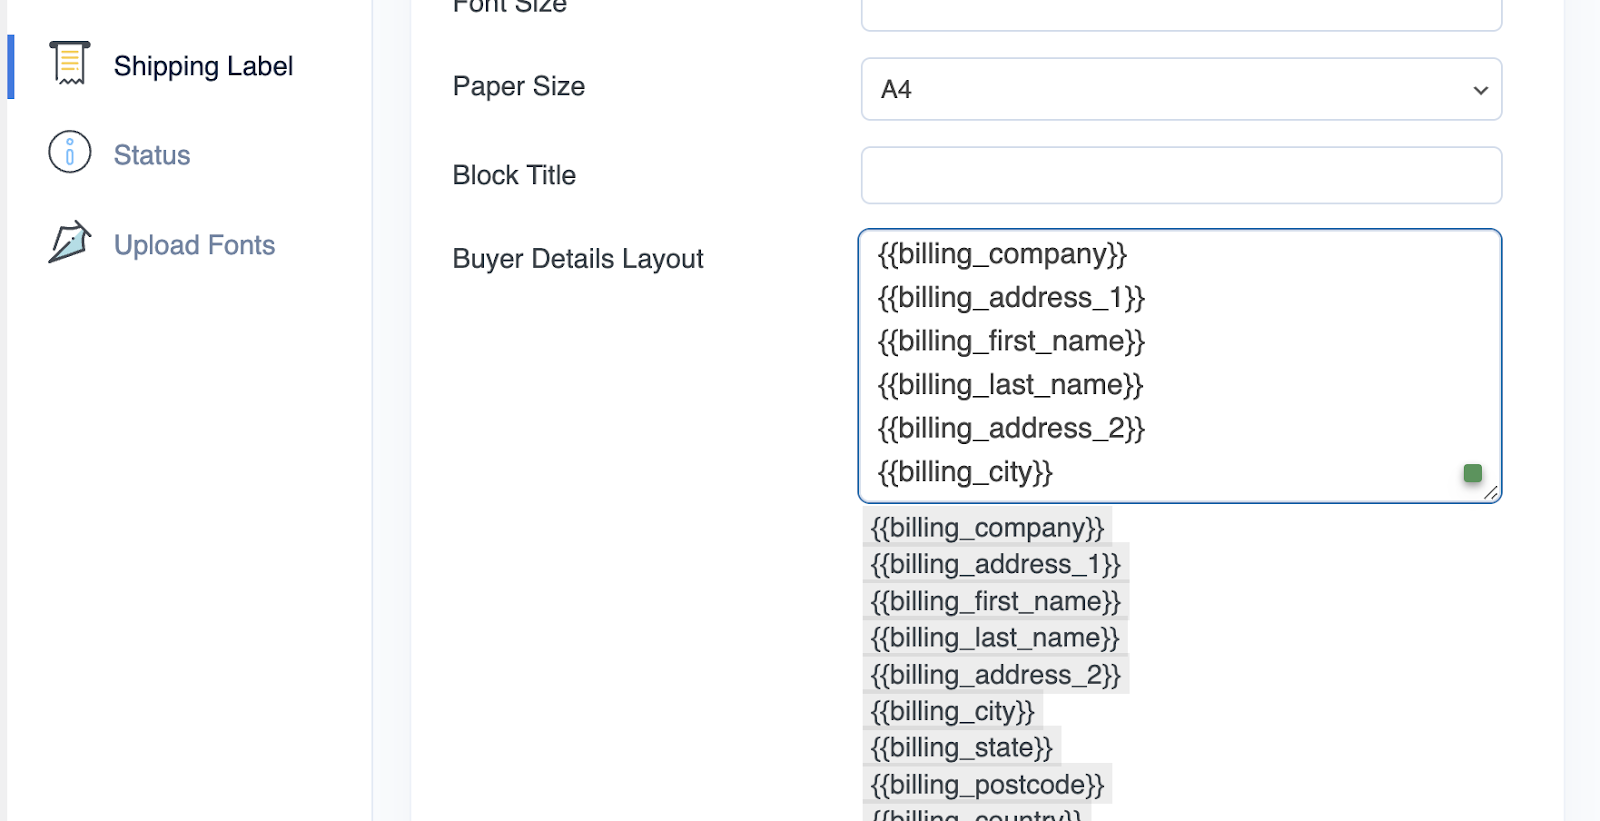 buyer details layout in shipping label